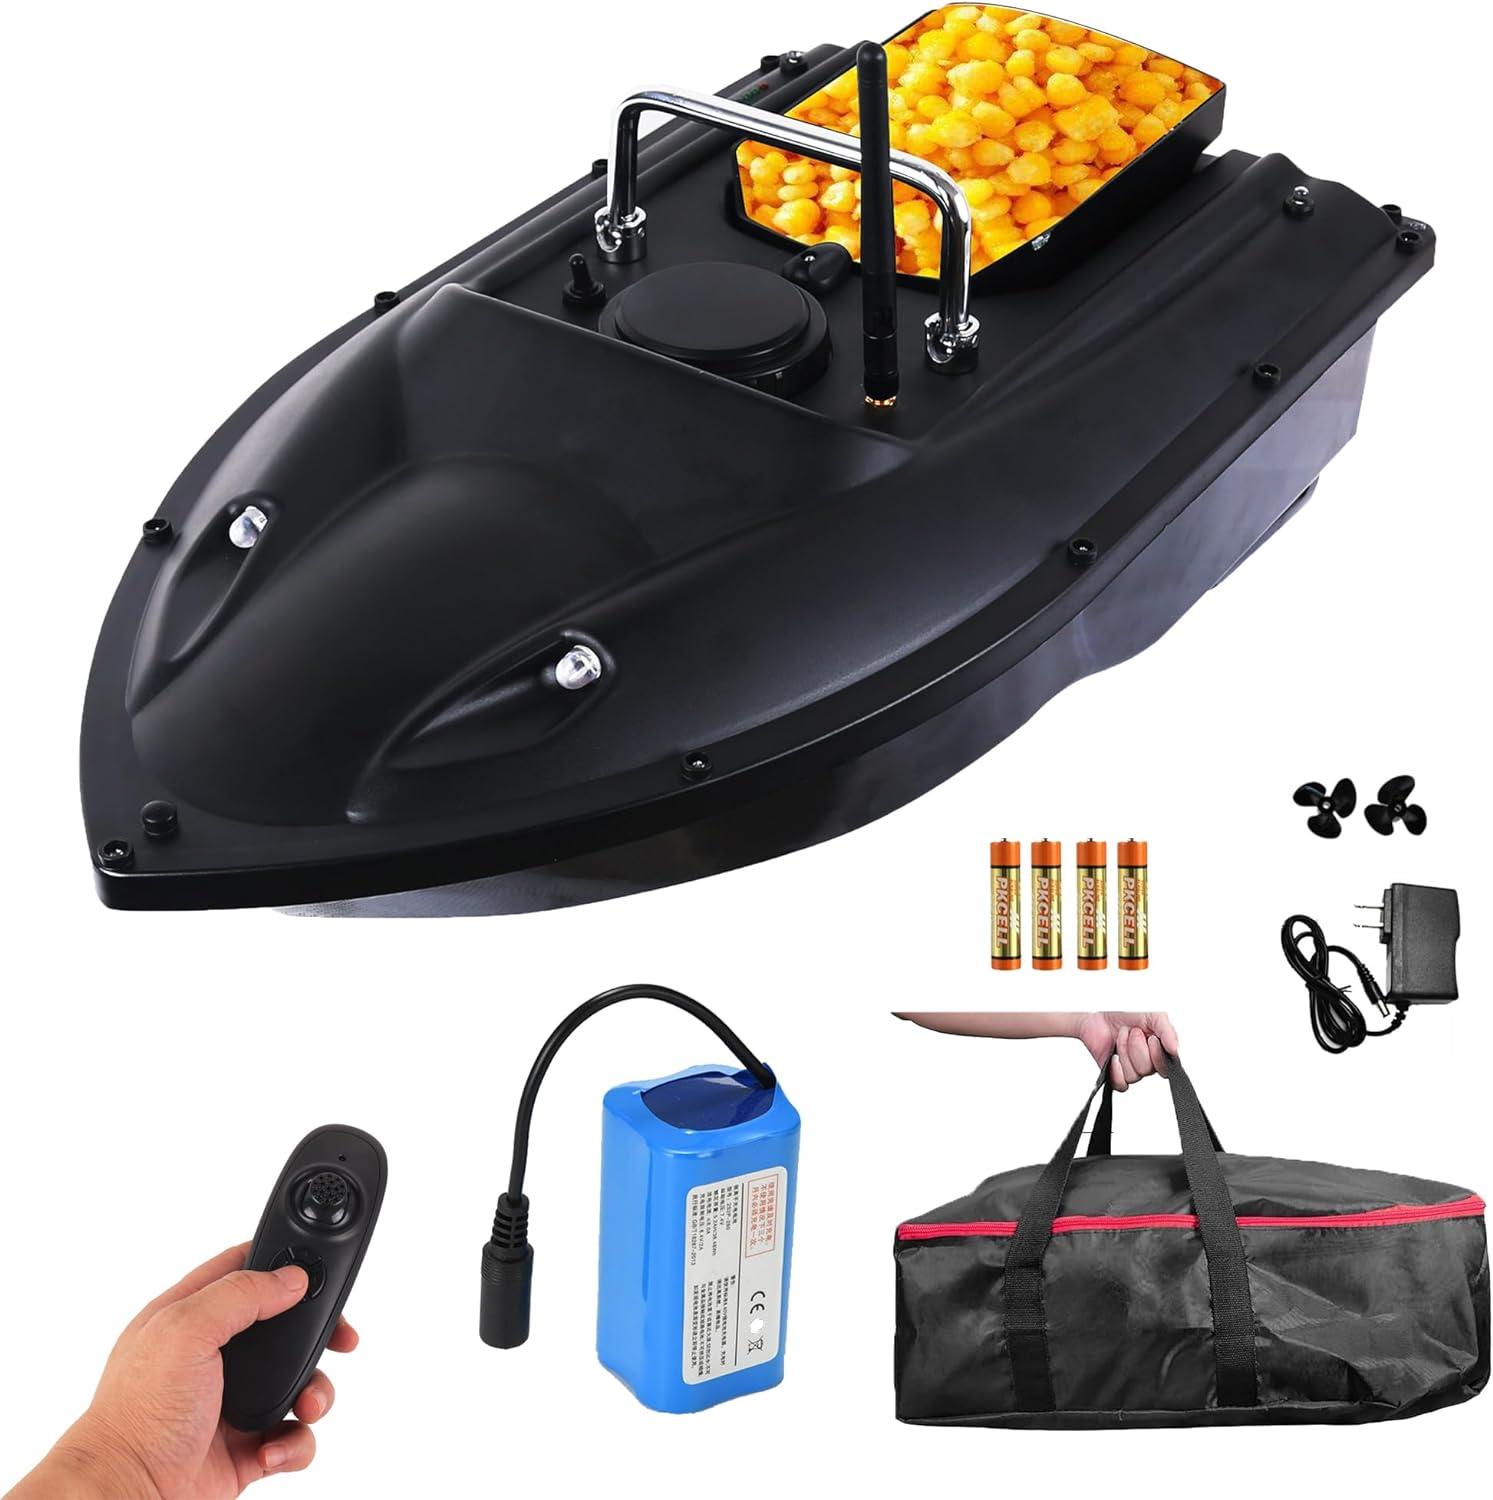 Remote Control Fishing Bait Boat: Benefits of a Remote Control Fishing Bait Boat: Efficient, Time Saving, Precise Bait Placement